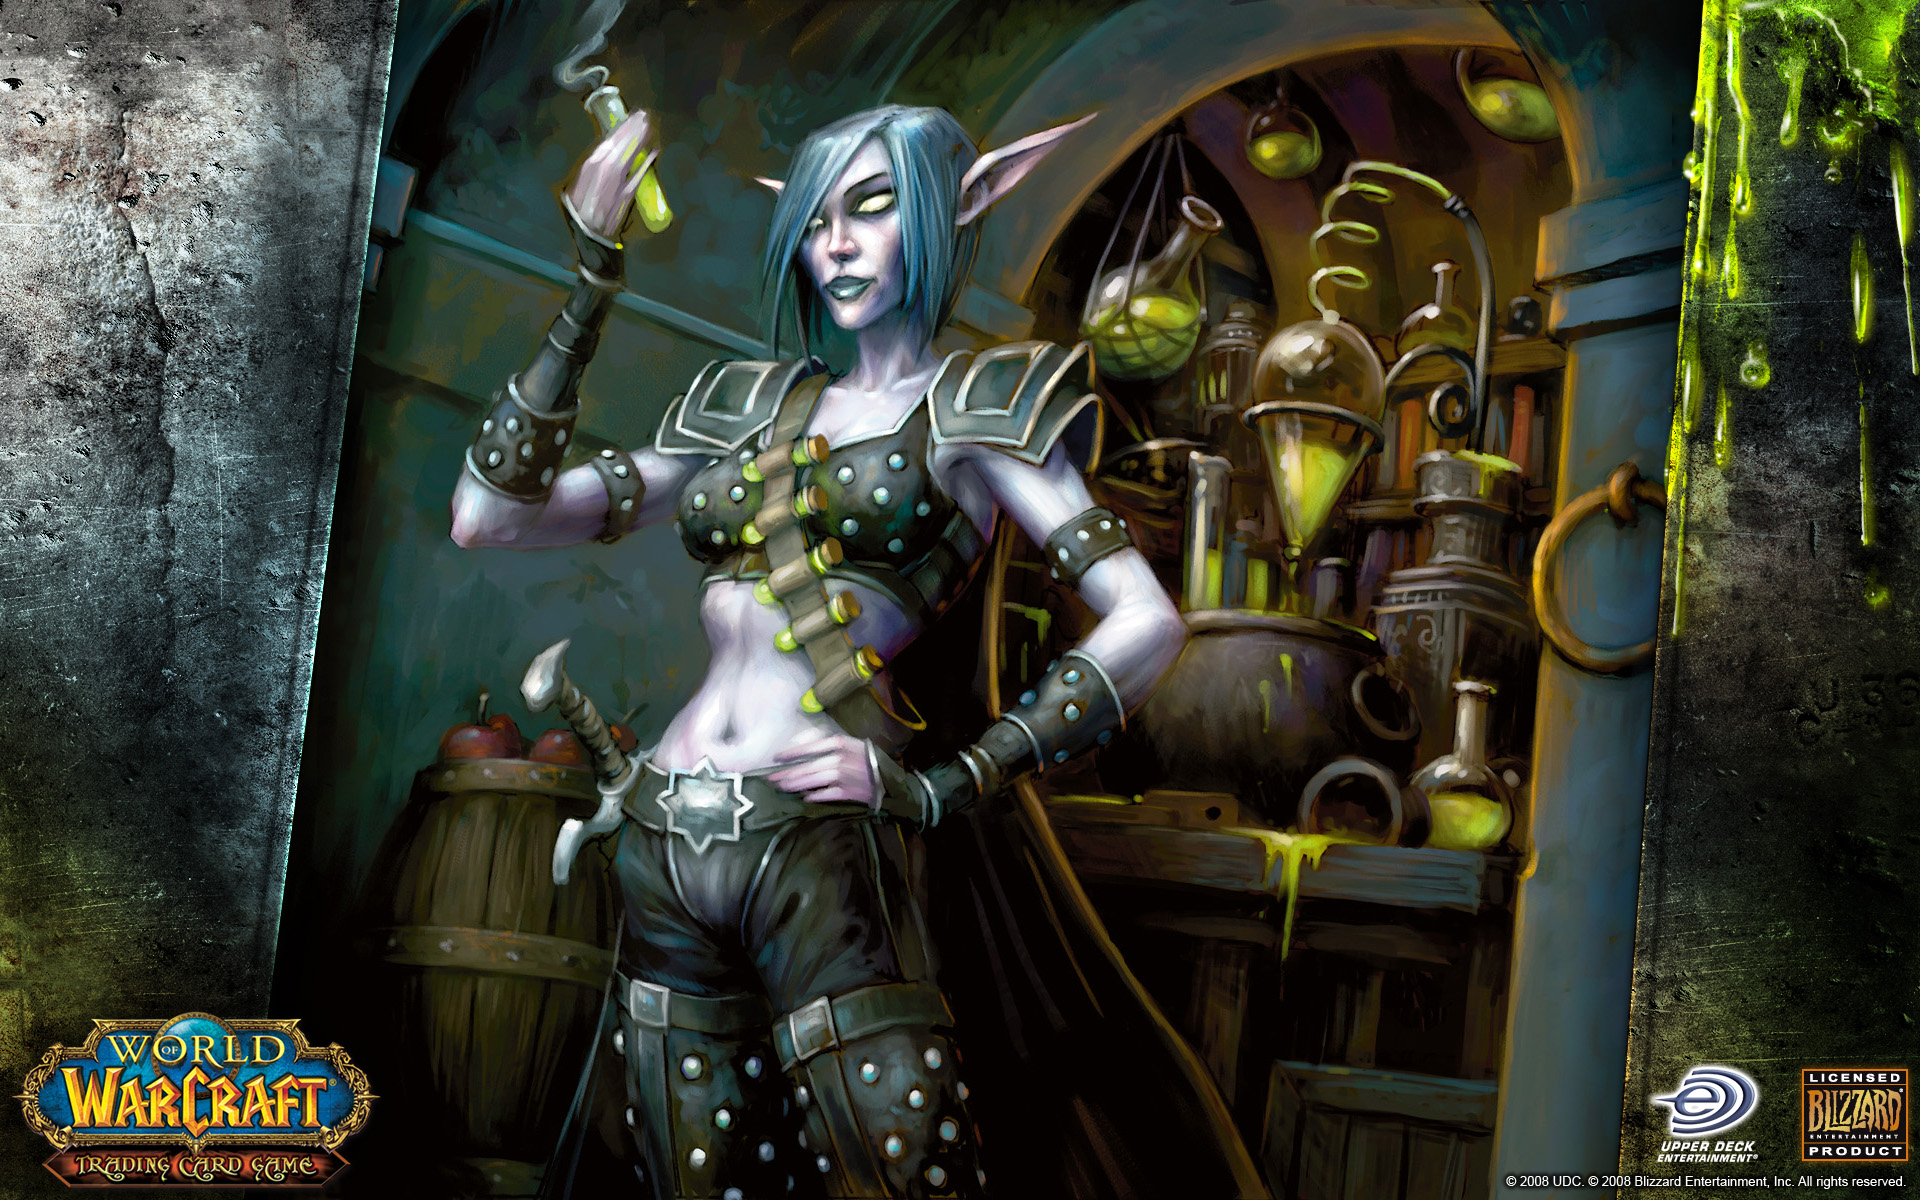 Night Elf character conducting alchemical magic in the dark realm of World of Warcraft desktop wallpaper.